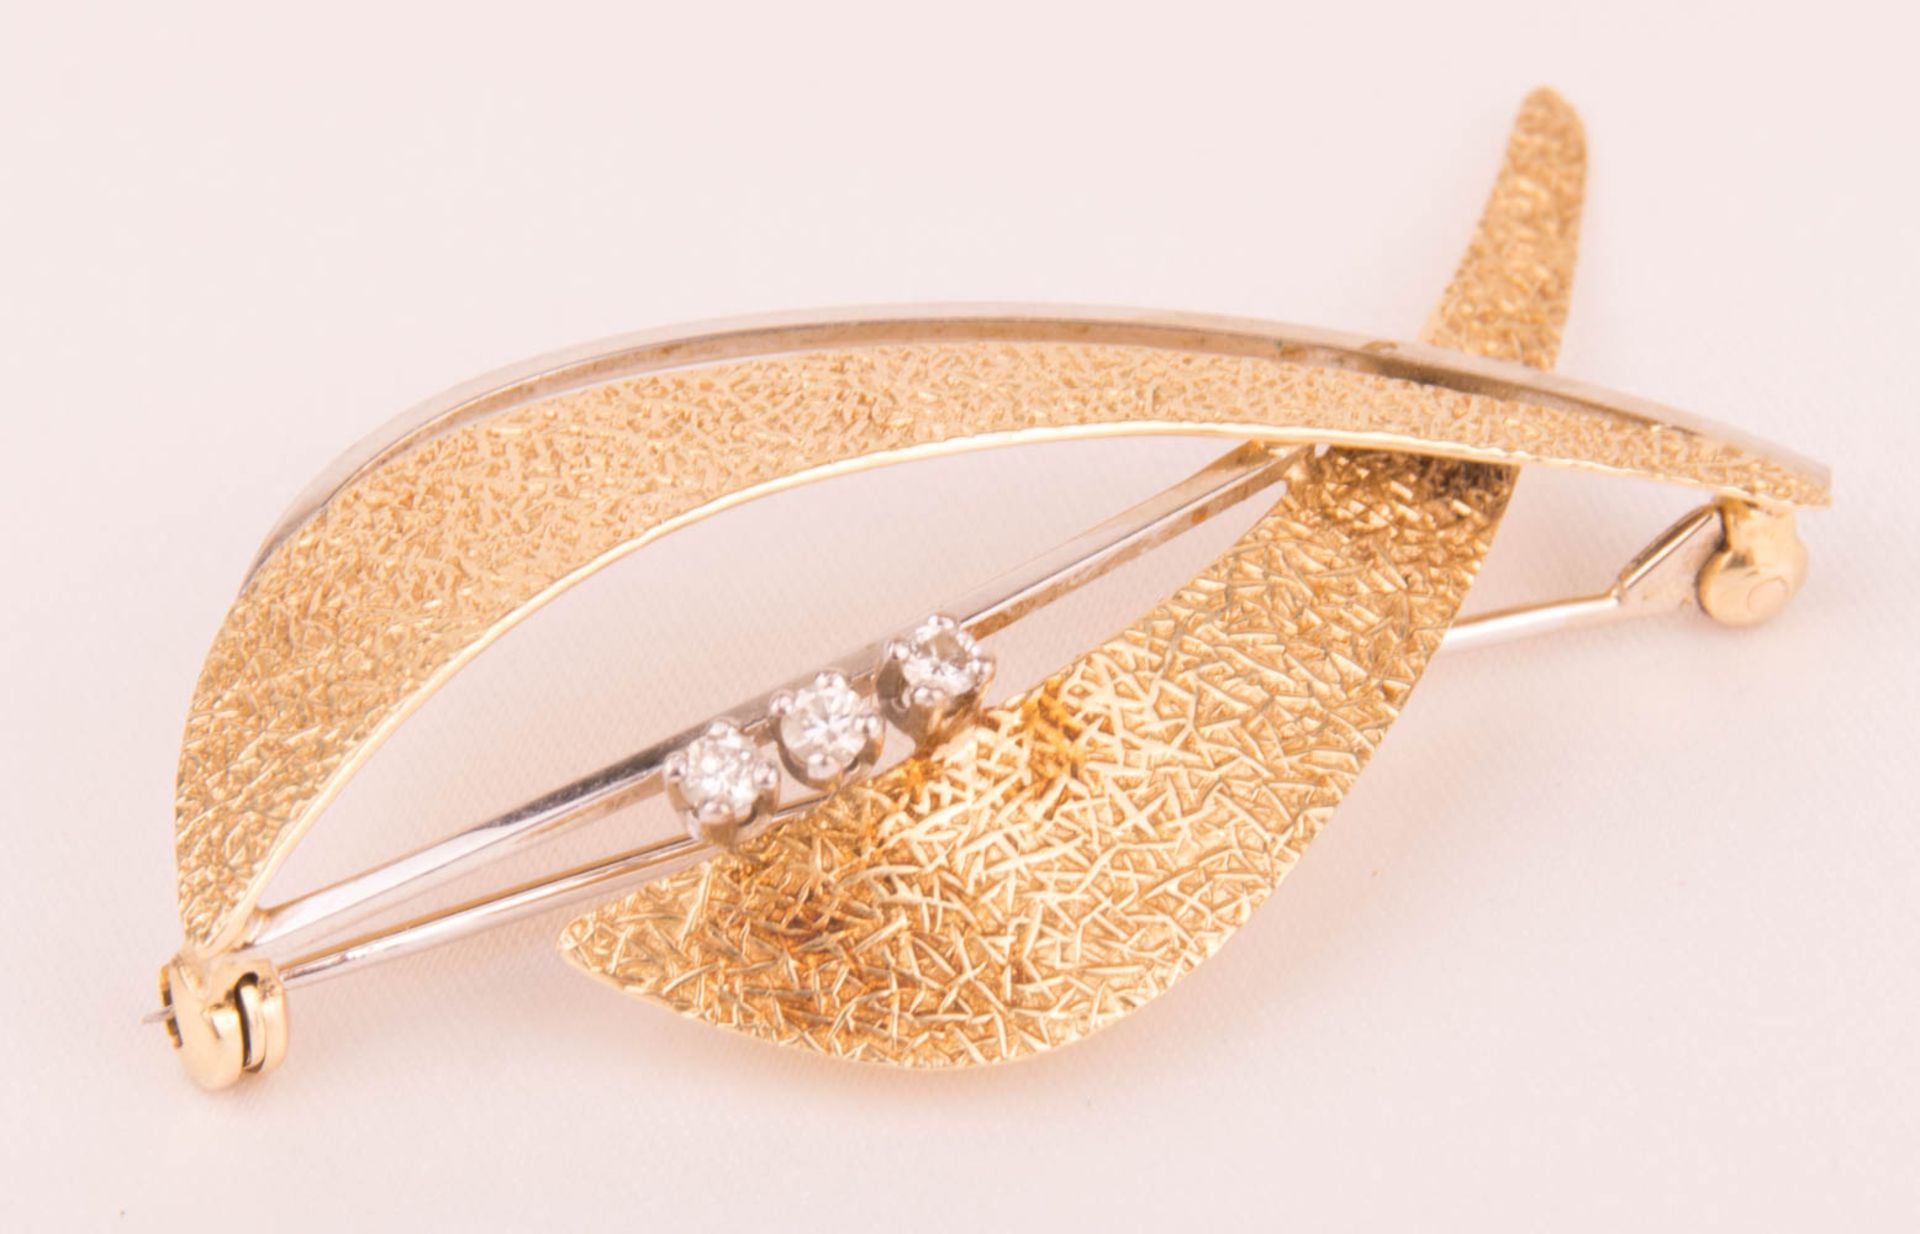 Brooch in abstract design, 585 yellow/white gold.